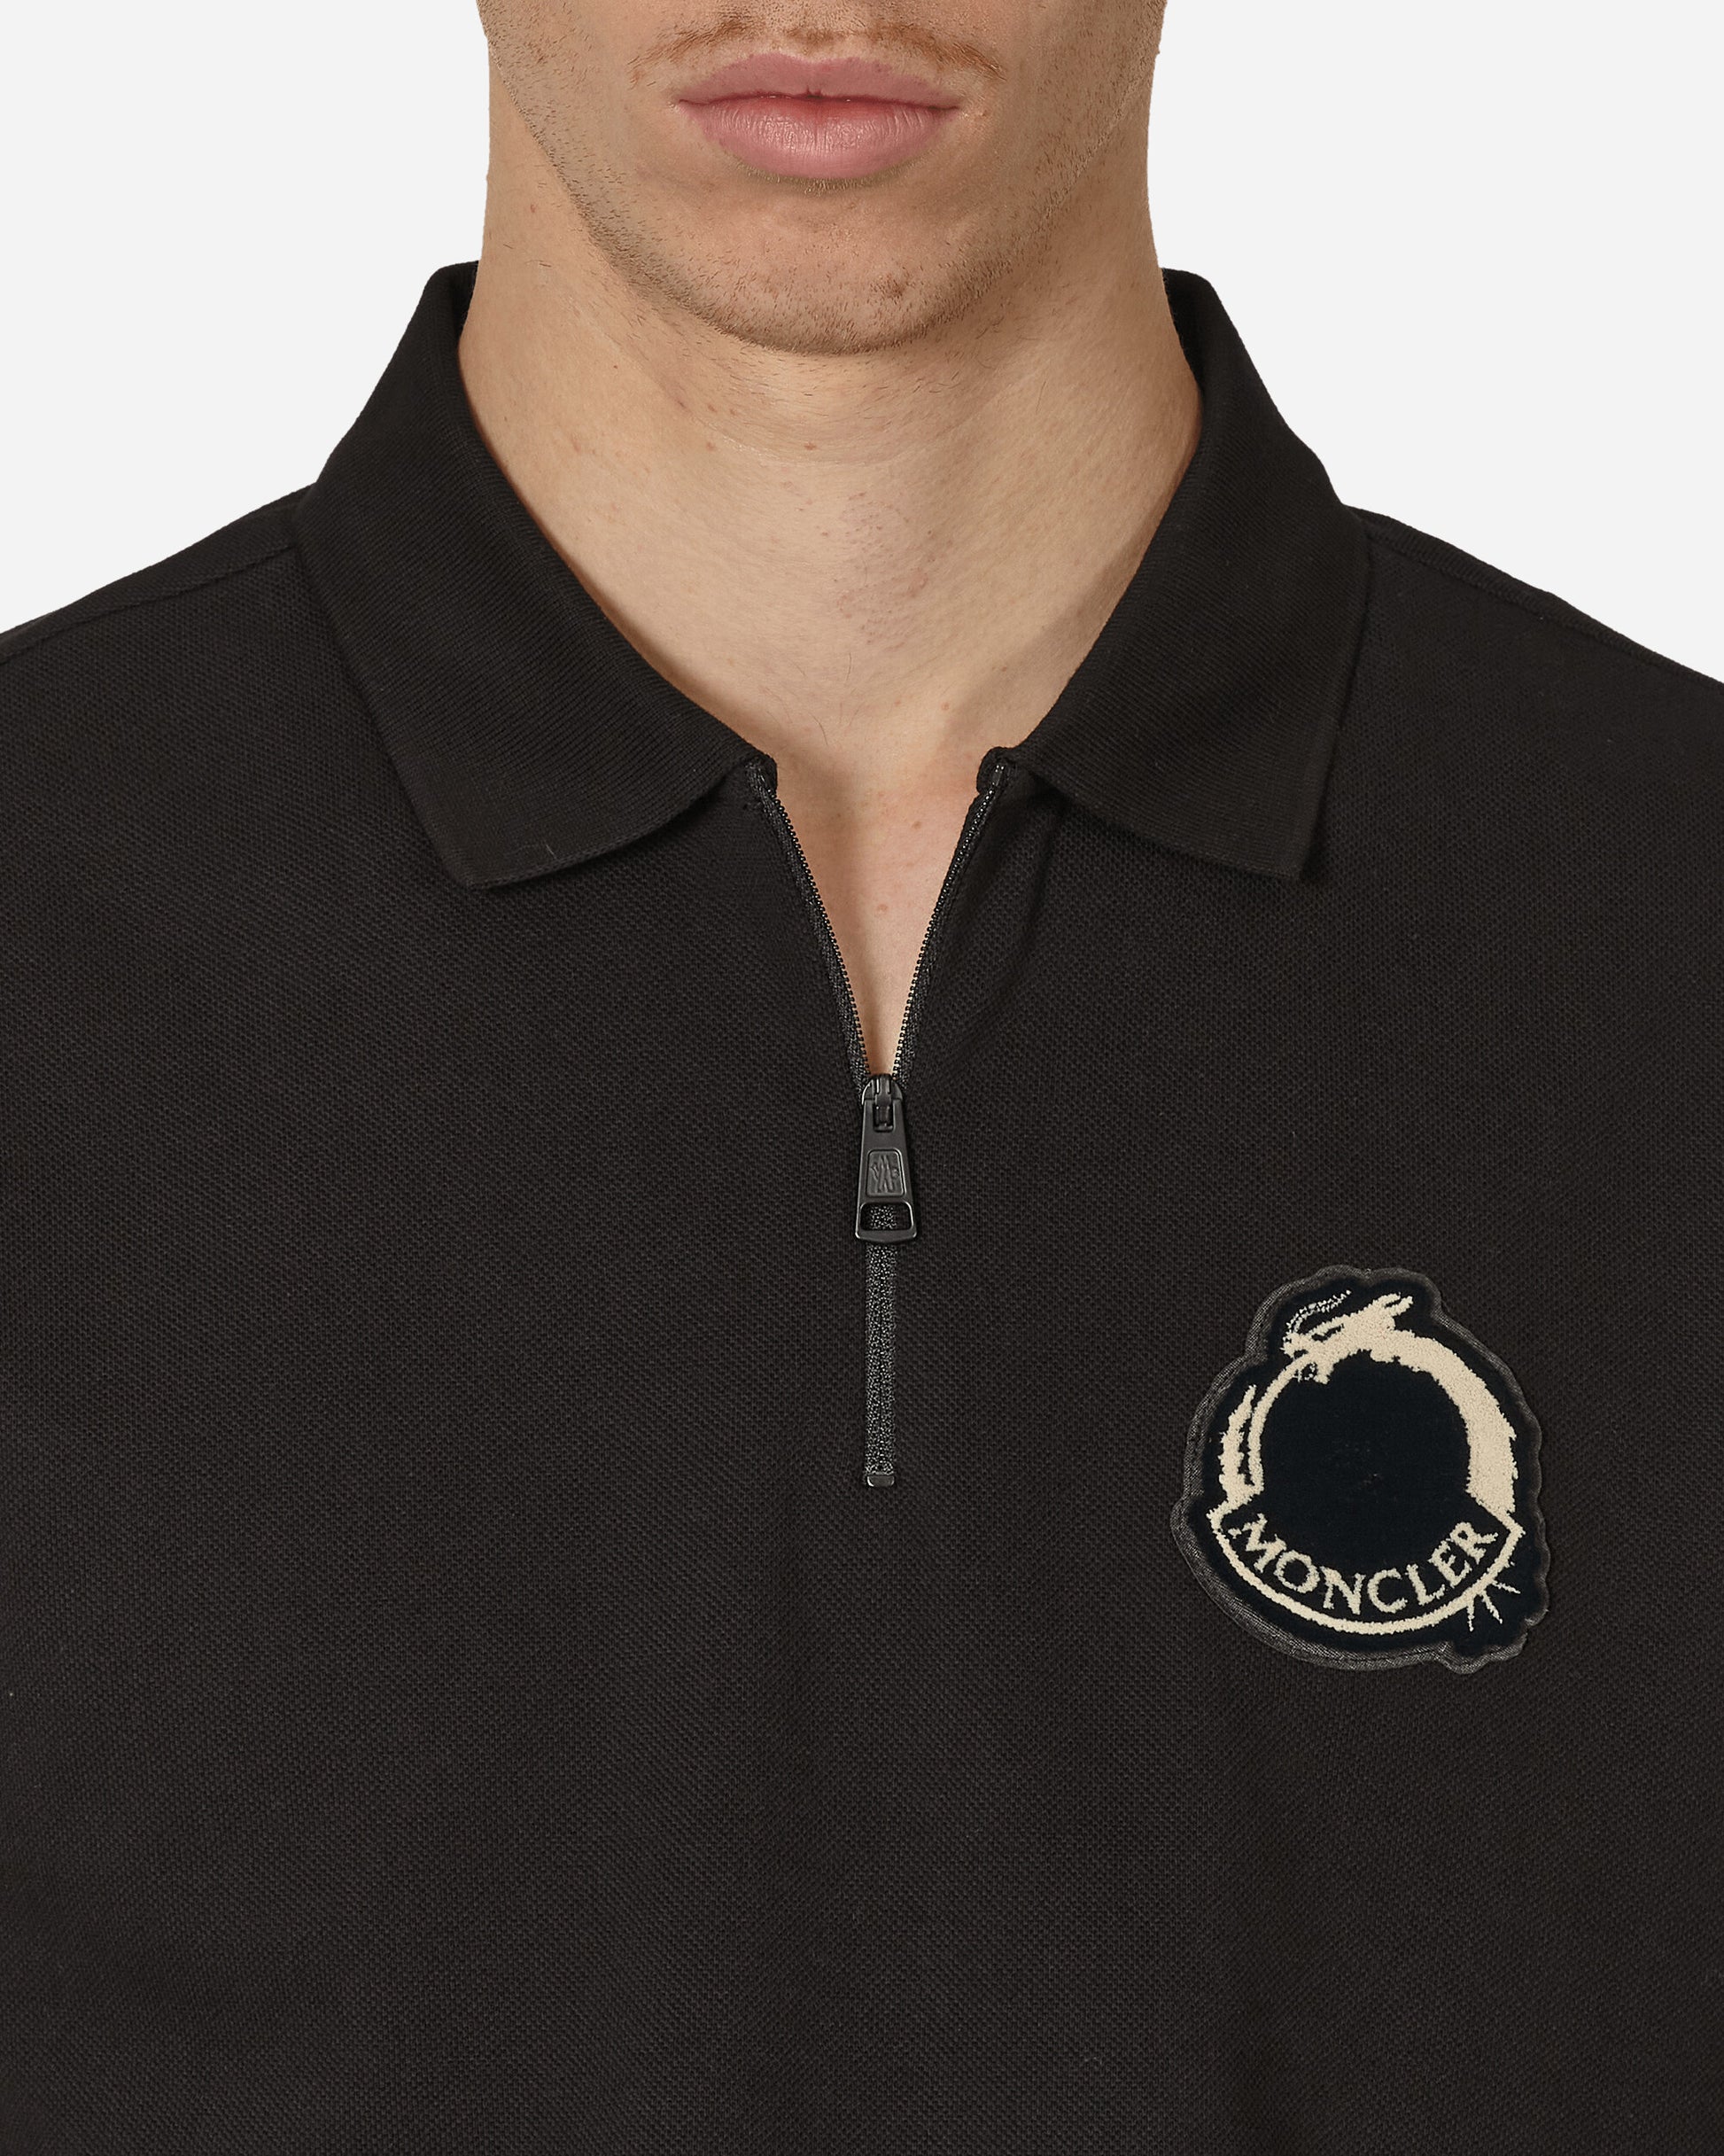 Moncler Ss Polo Chinese New Year Black T-Shirts Polo 8A0001089A16 999